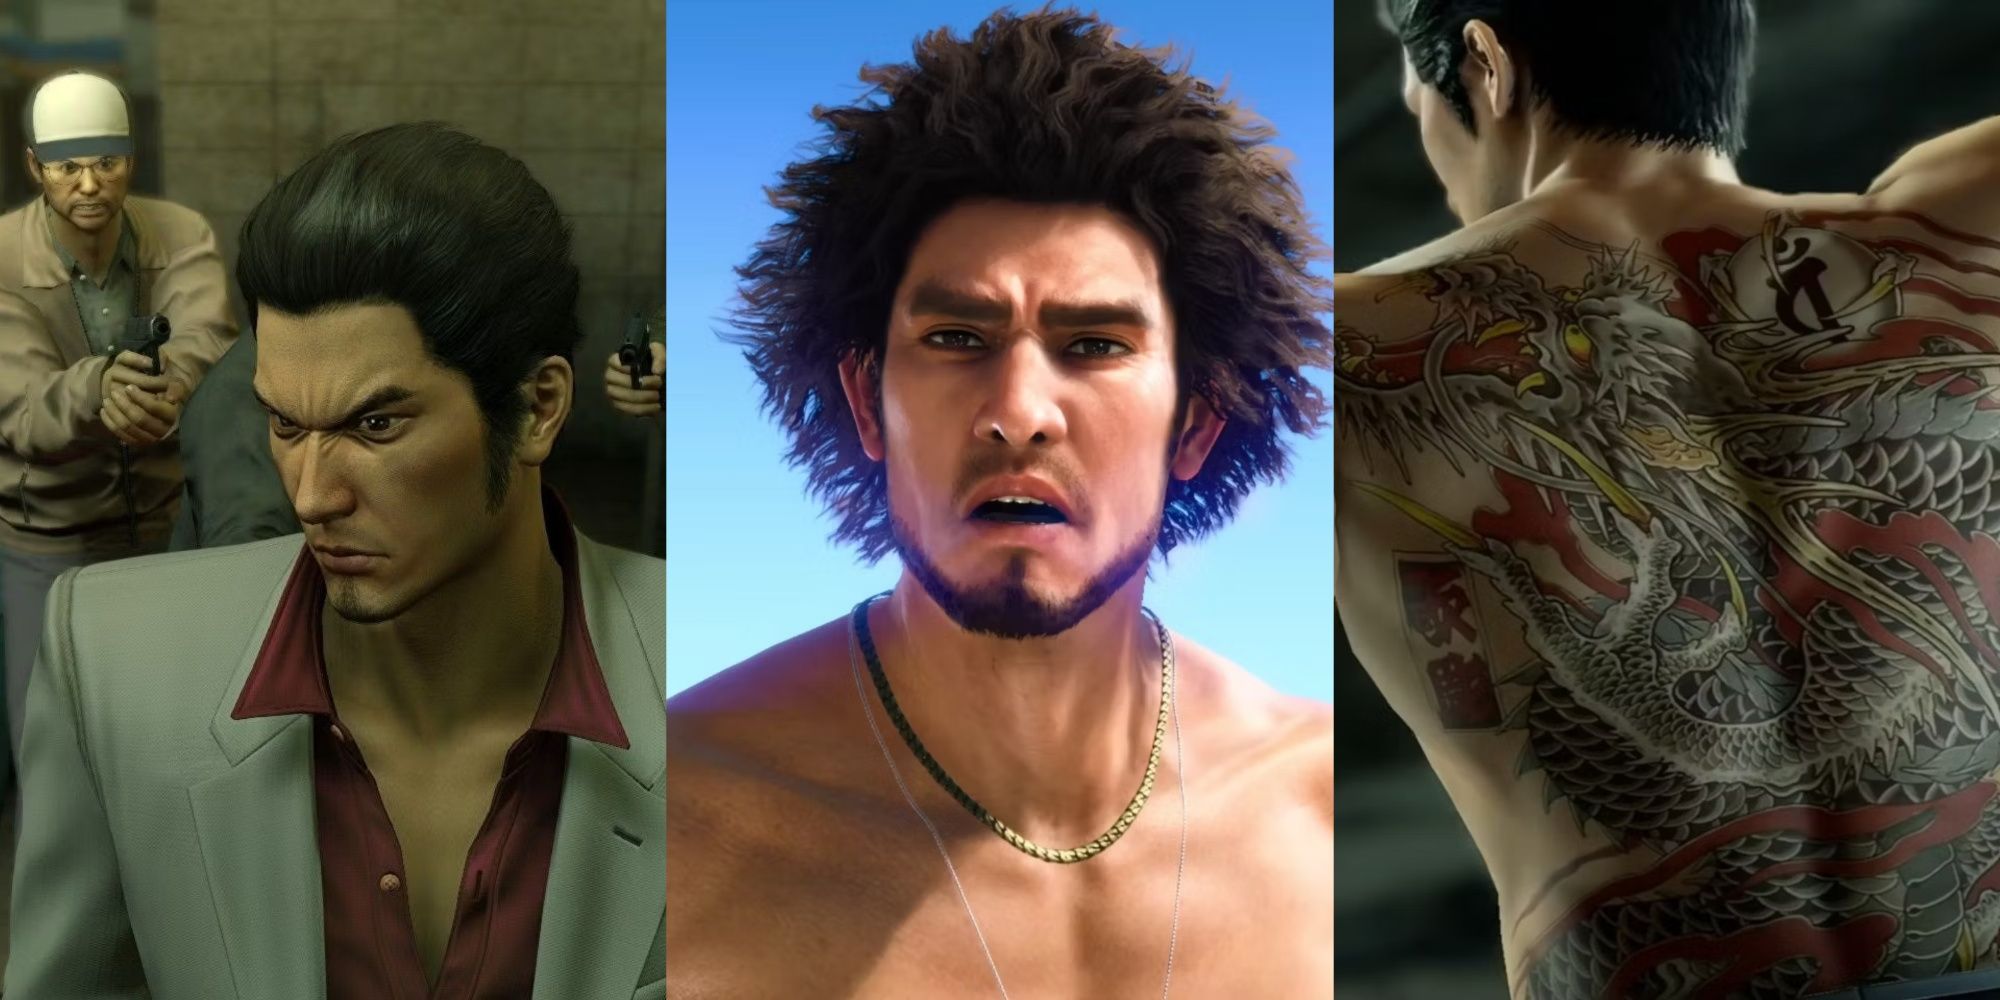 Kiryu held at gunpoint from behind, Ichiban with a shocked expression and a blue sky background, and Kiryu revealing his dragon back tattoo, left to right